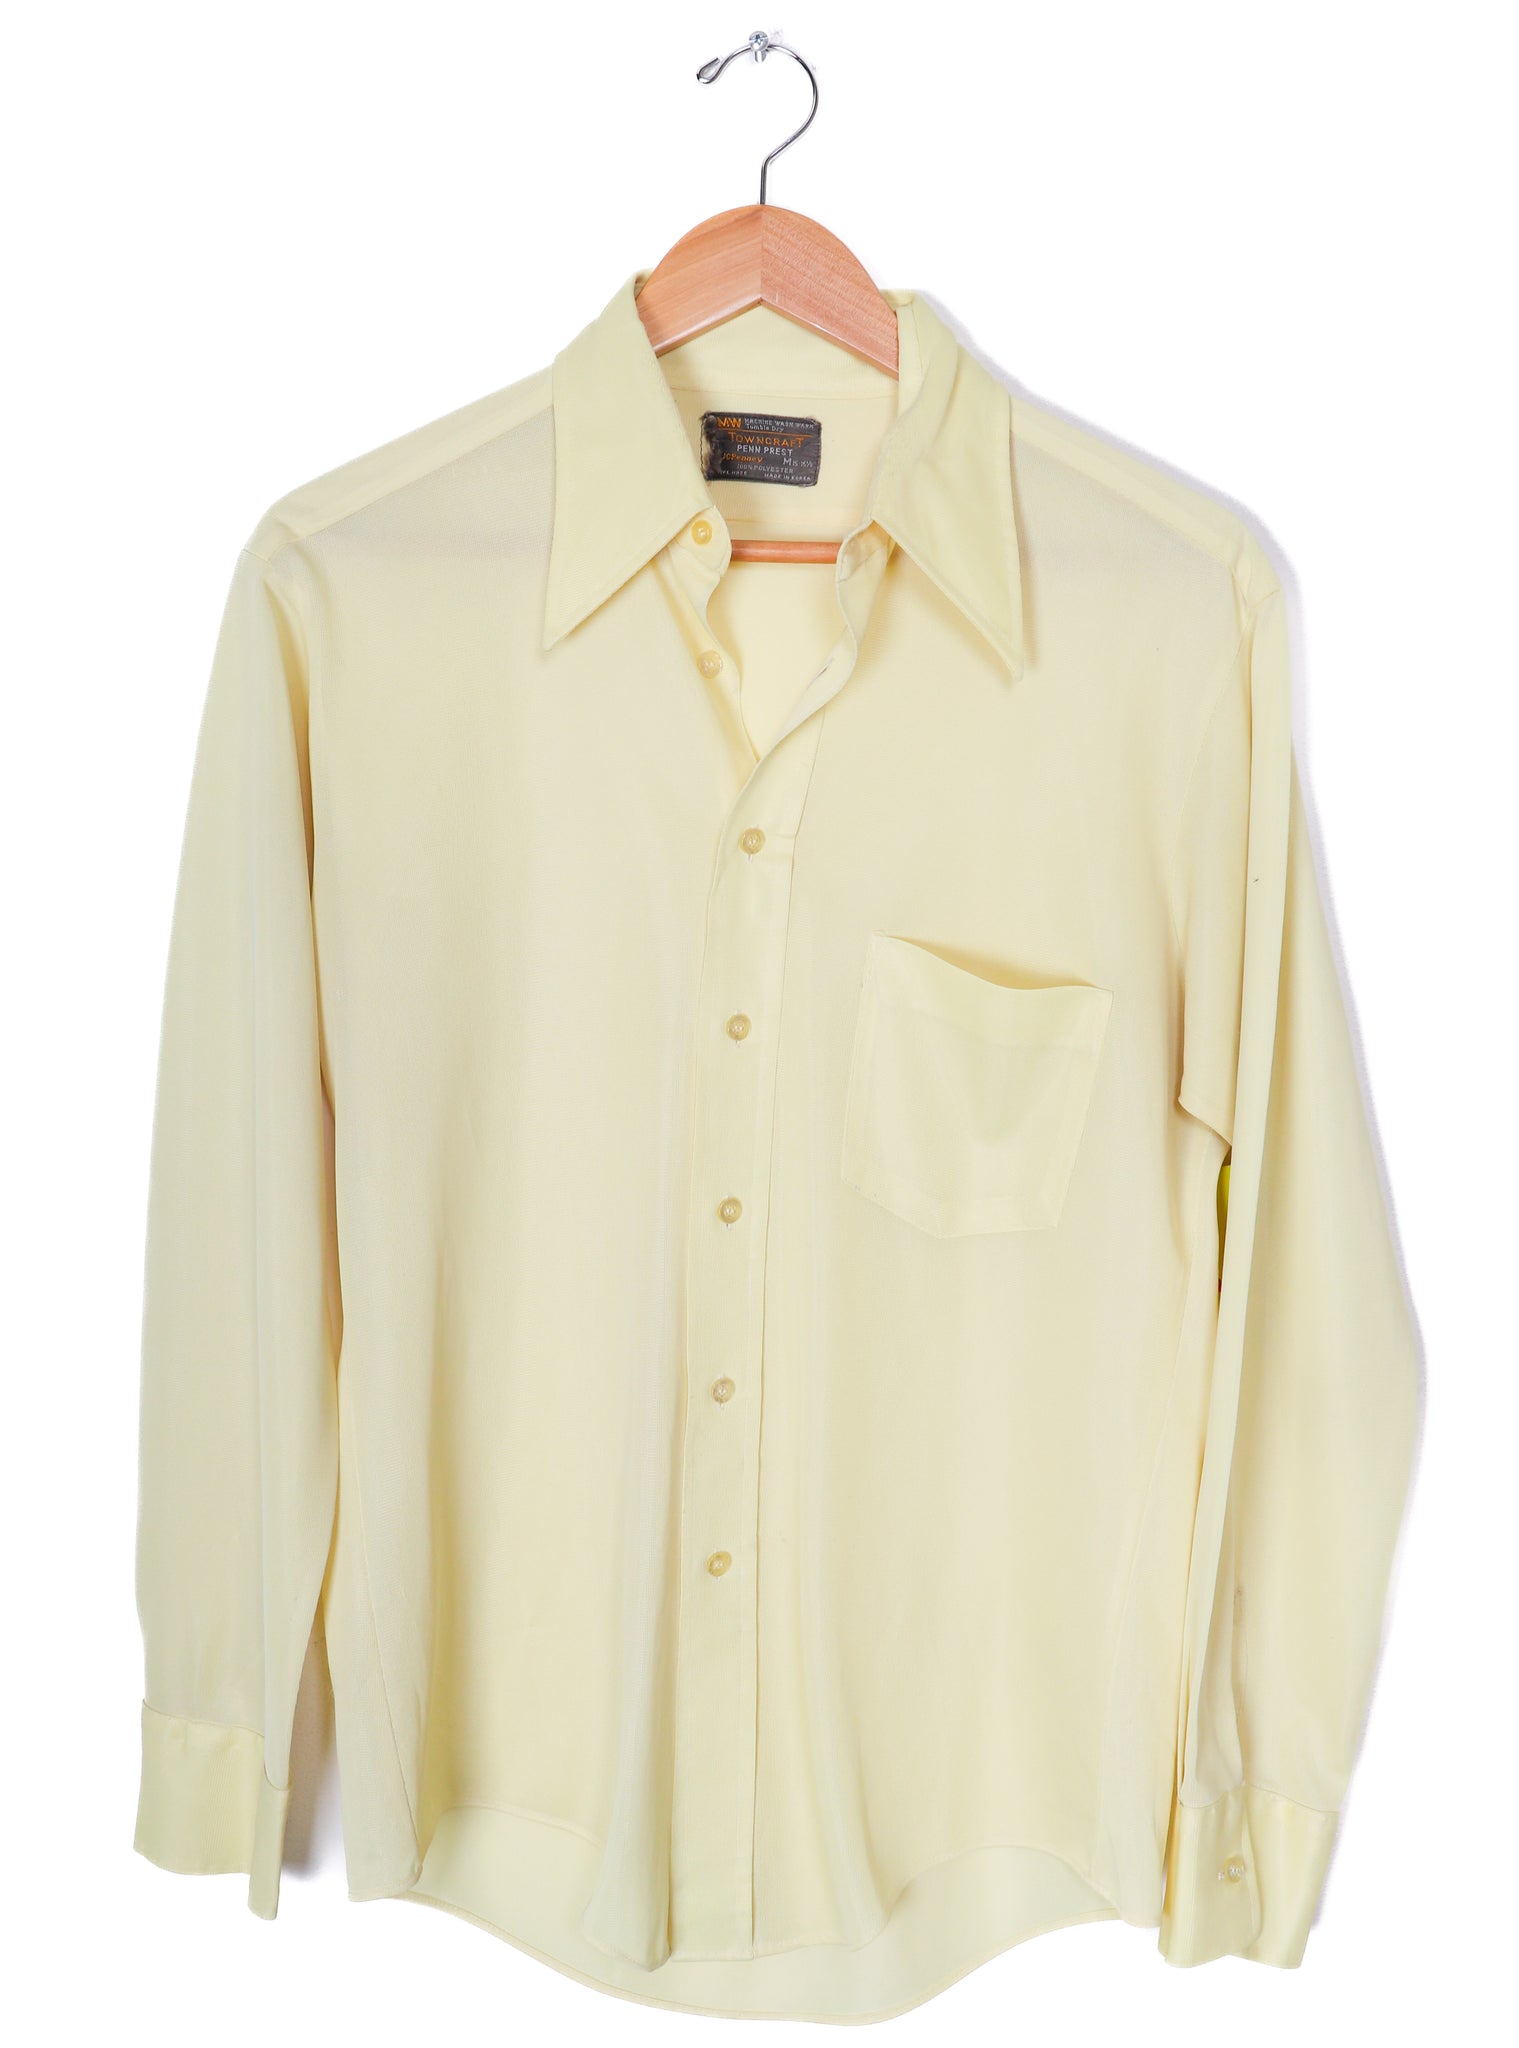 70s JCPenny Towncraft Yellow Polyester Button Up